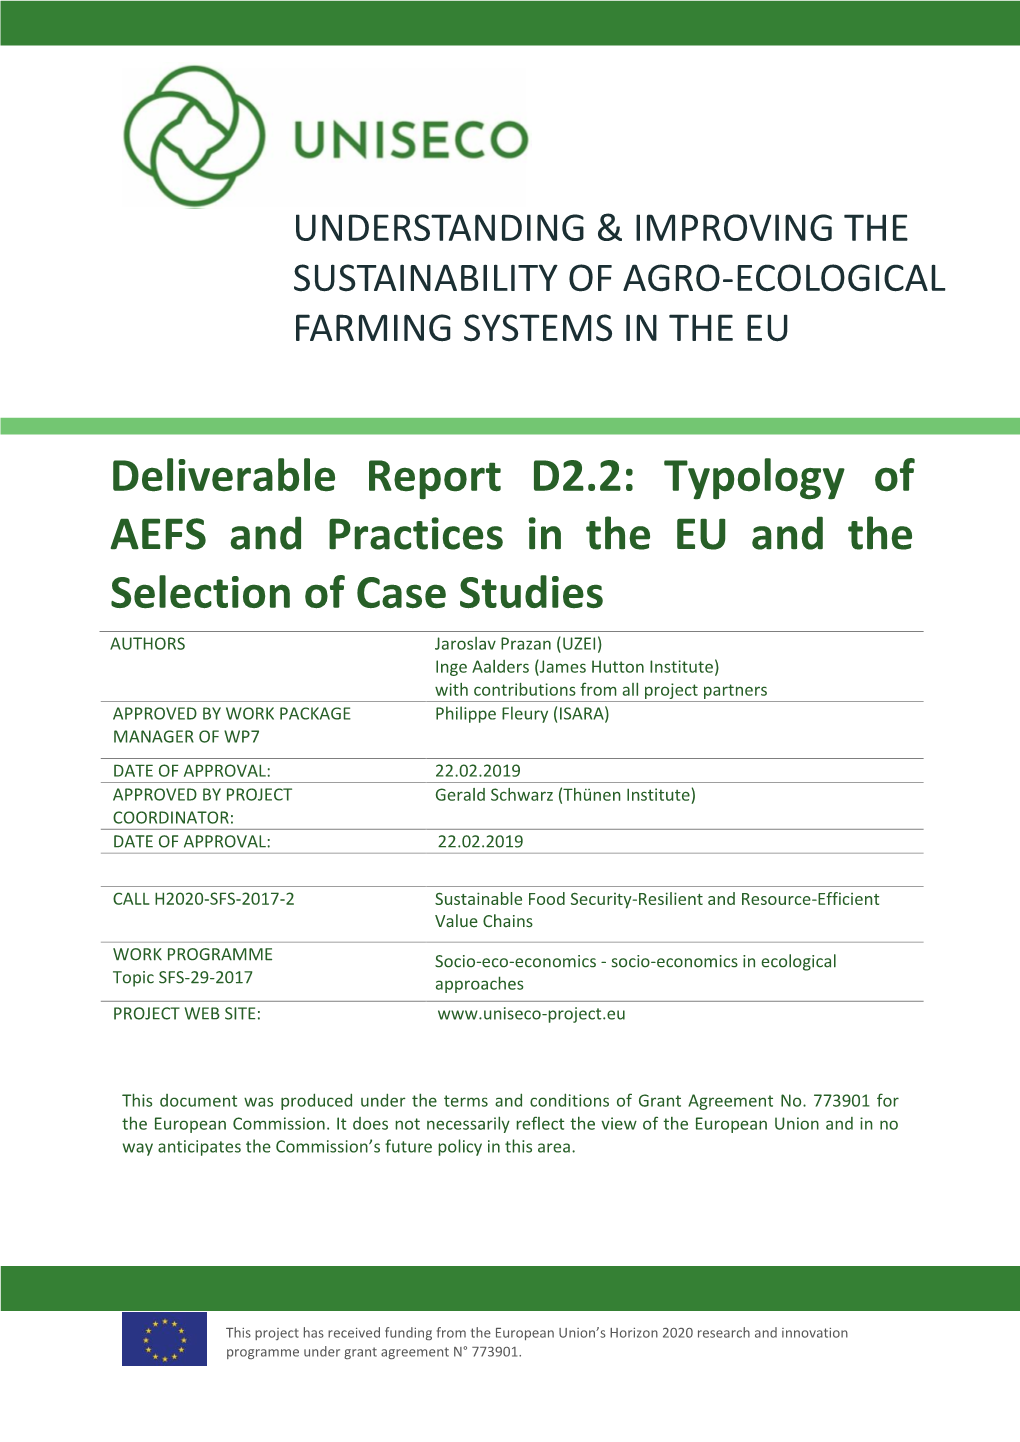 Typology of AEFS and Practices in the EU and the Selection of Case Studies